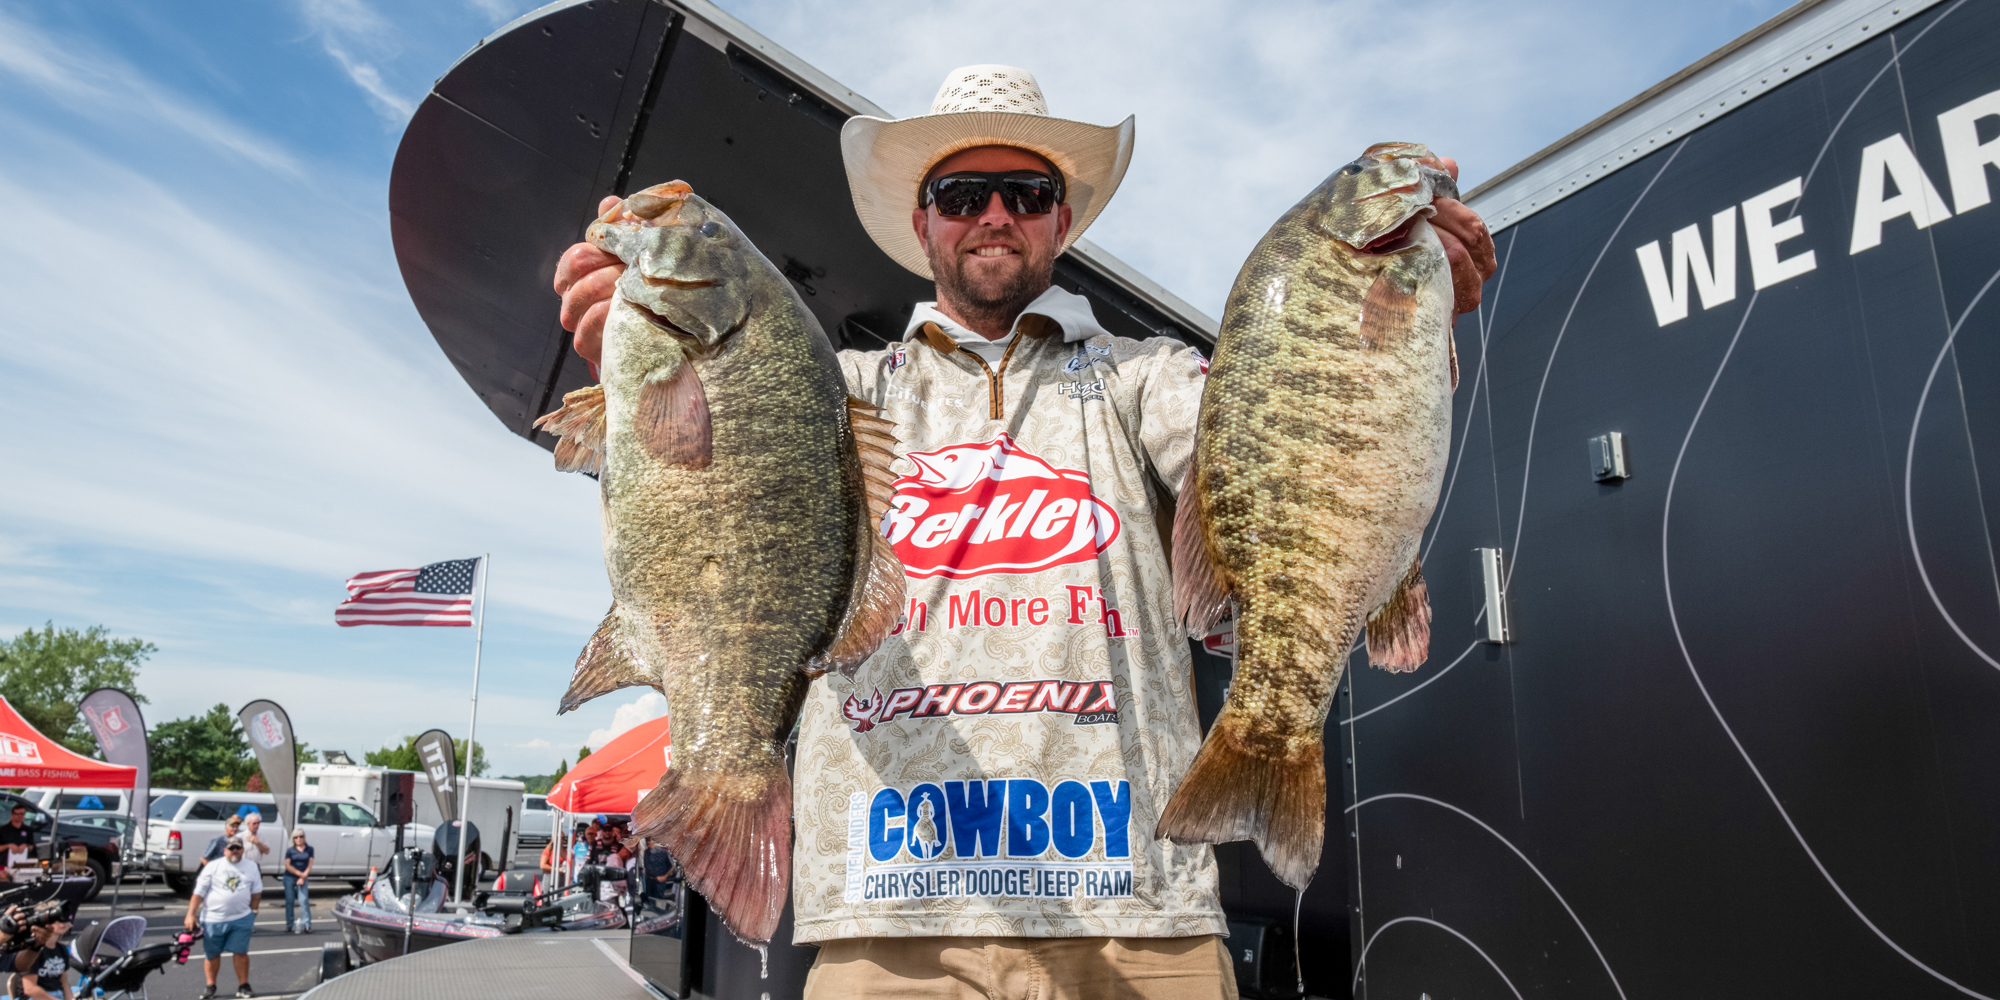 SCOTT SUGGS: Why I Love to Fish Heavy Grass in Deep Water - Major League  Fishing